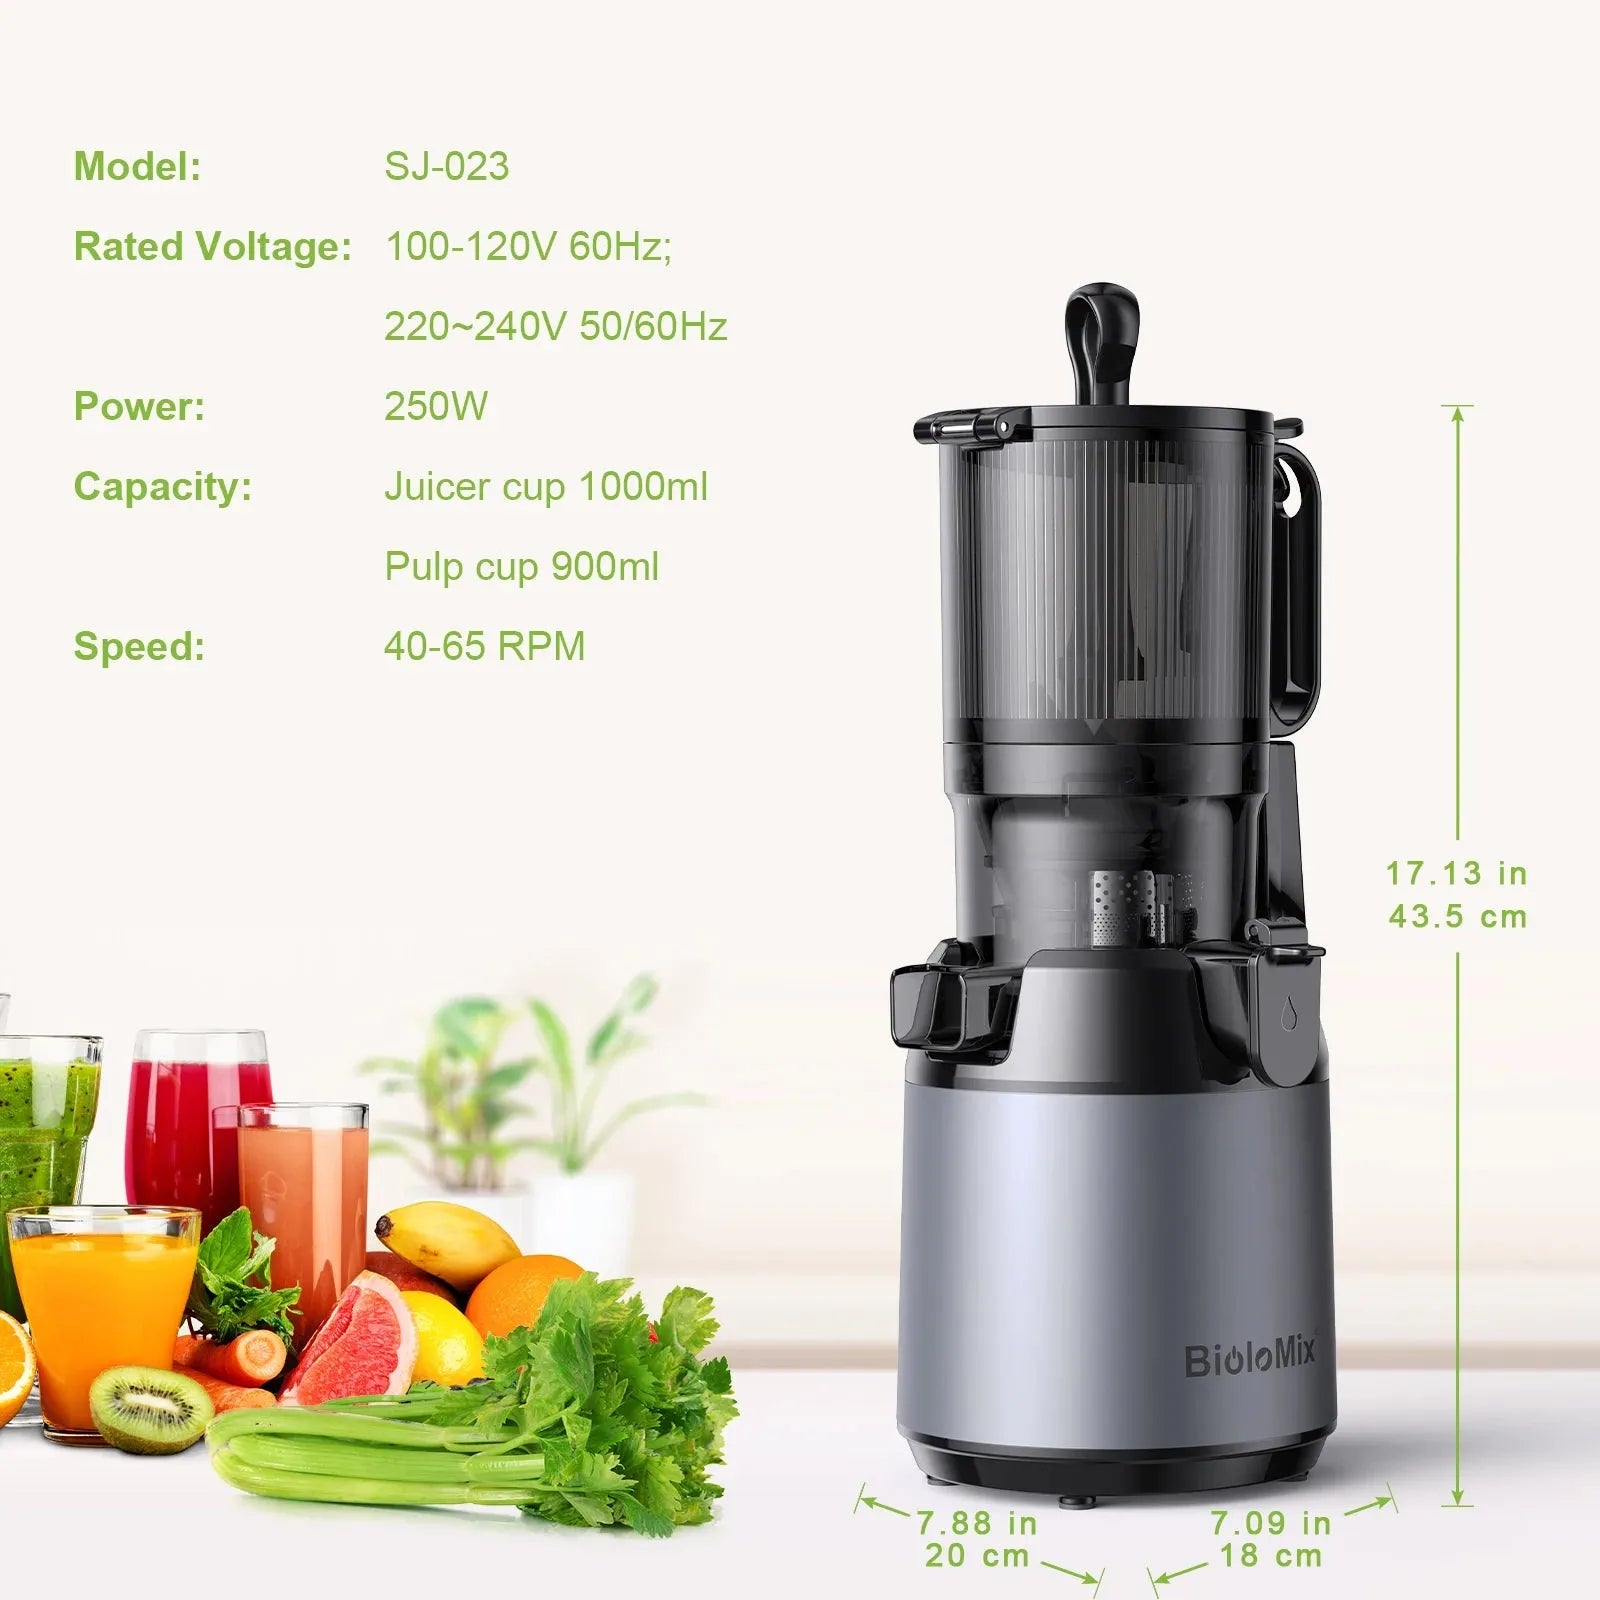 BioloMix Cold Press Juicer,with 130mm Feed Chute,Fit Whole Fruits & Vegetables,High Juice Yield,BPA FREE Slow Masticating Juicer